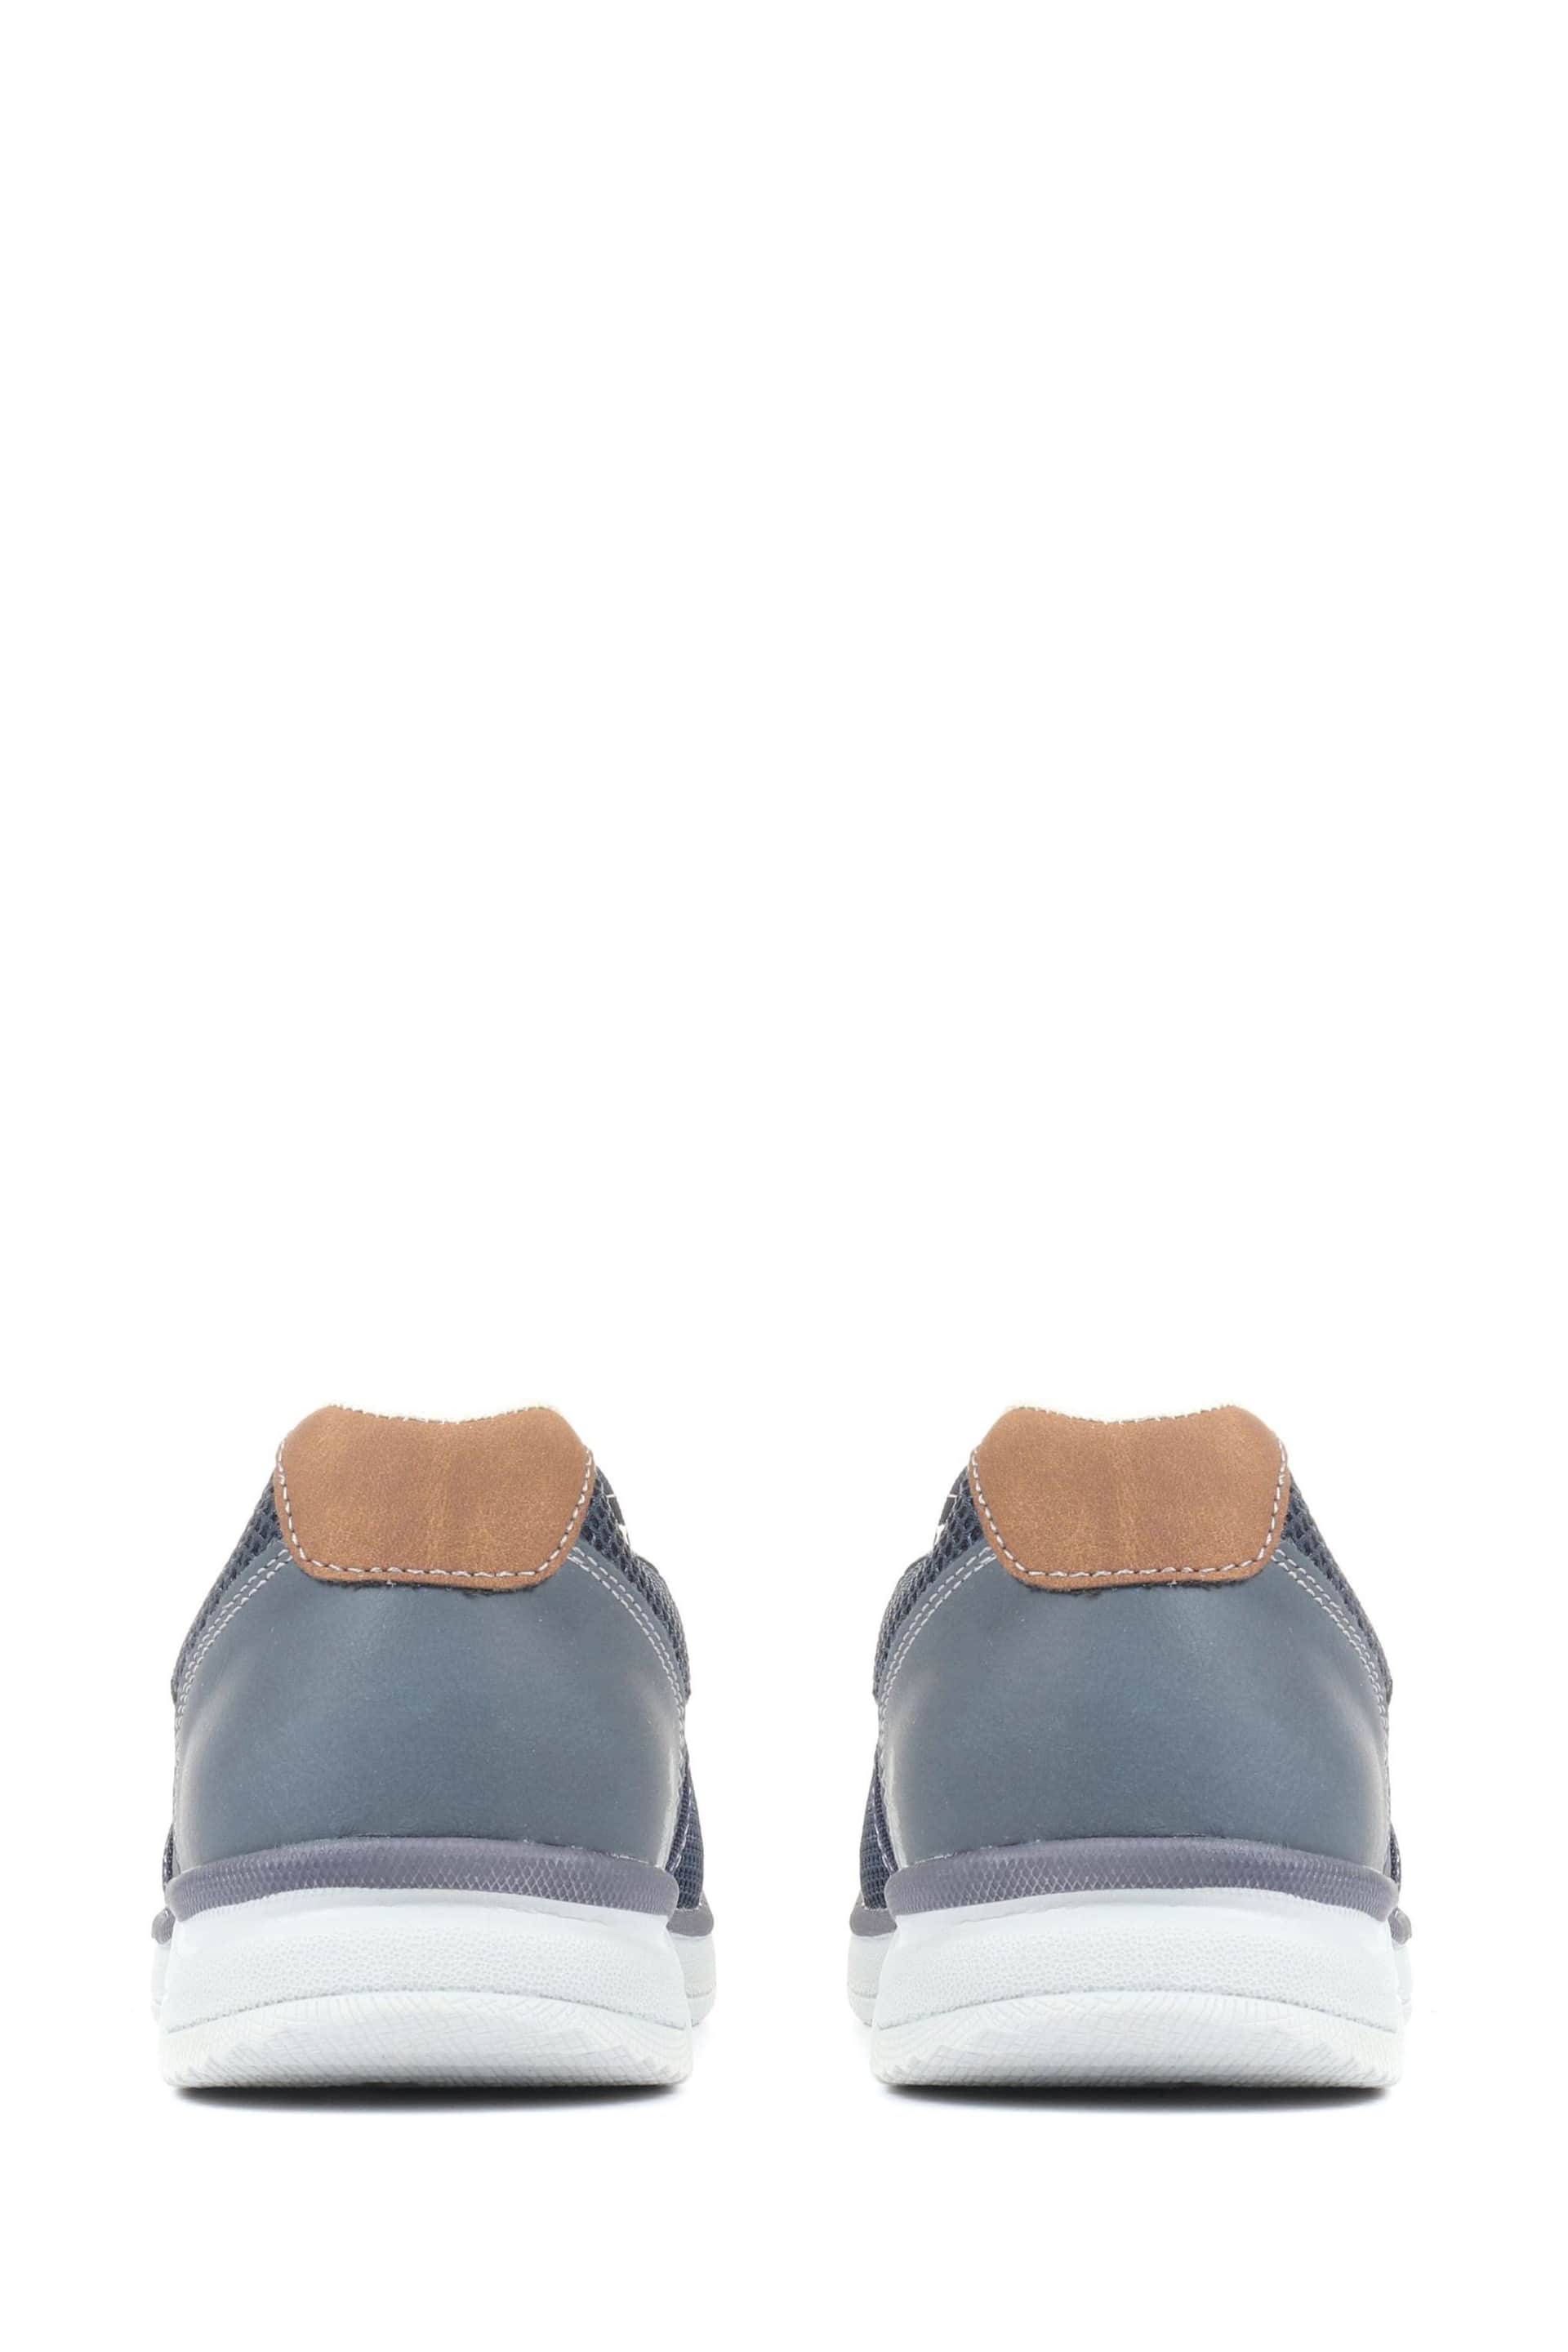 Pavers Slip-On Mesh Shoes - Image 2 of 5